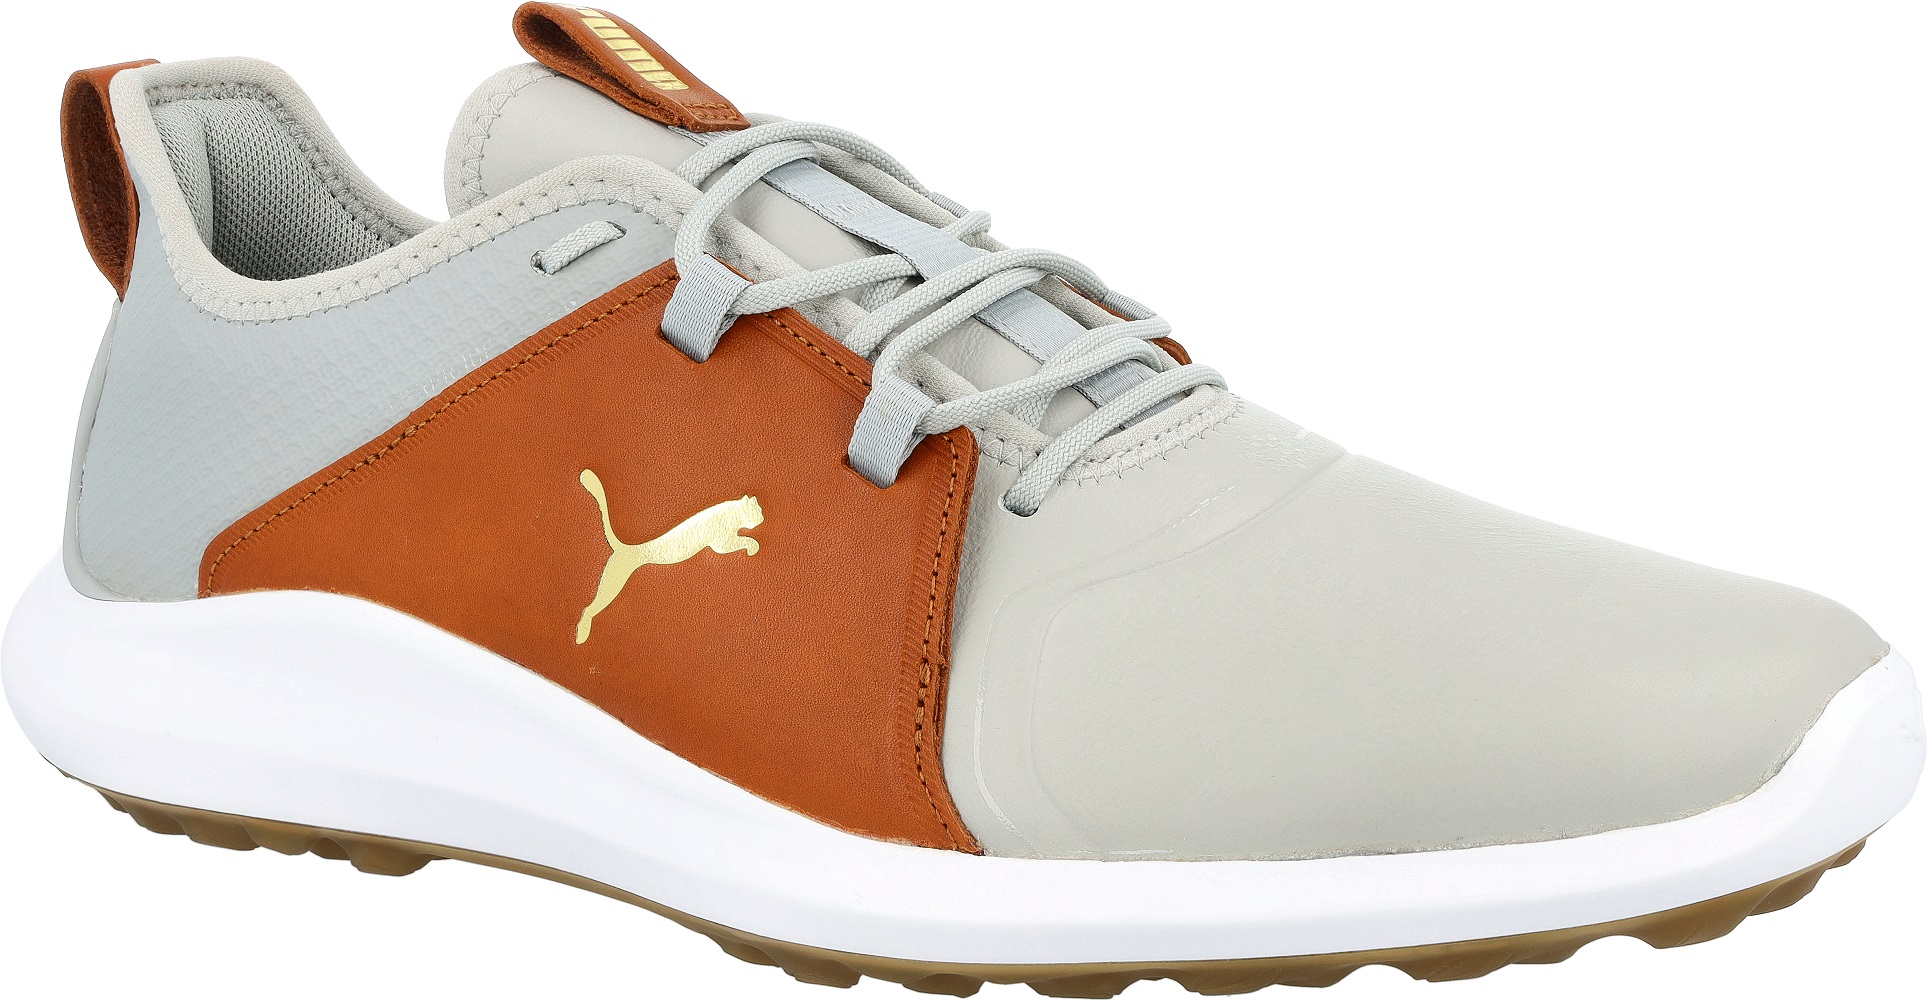 Puma Ignite Fasten8 Crafted Rise/Gold/Brown Men Spikeless Golf Shoes Choose Size - image 2 of 8